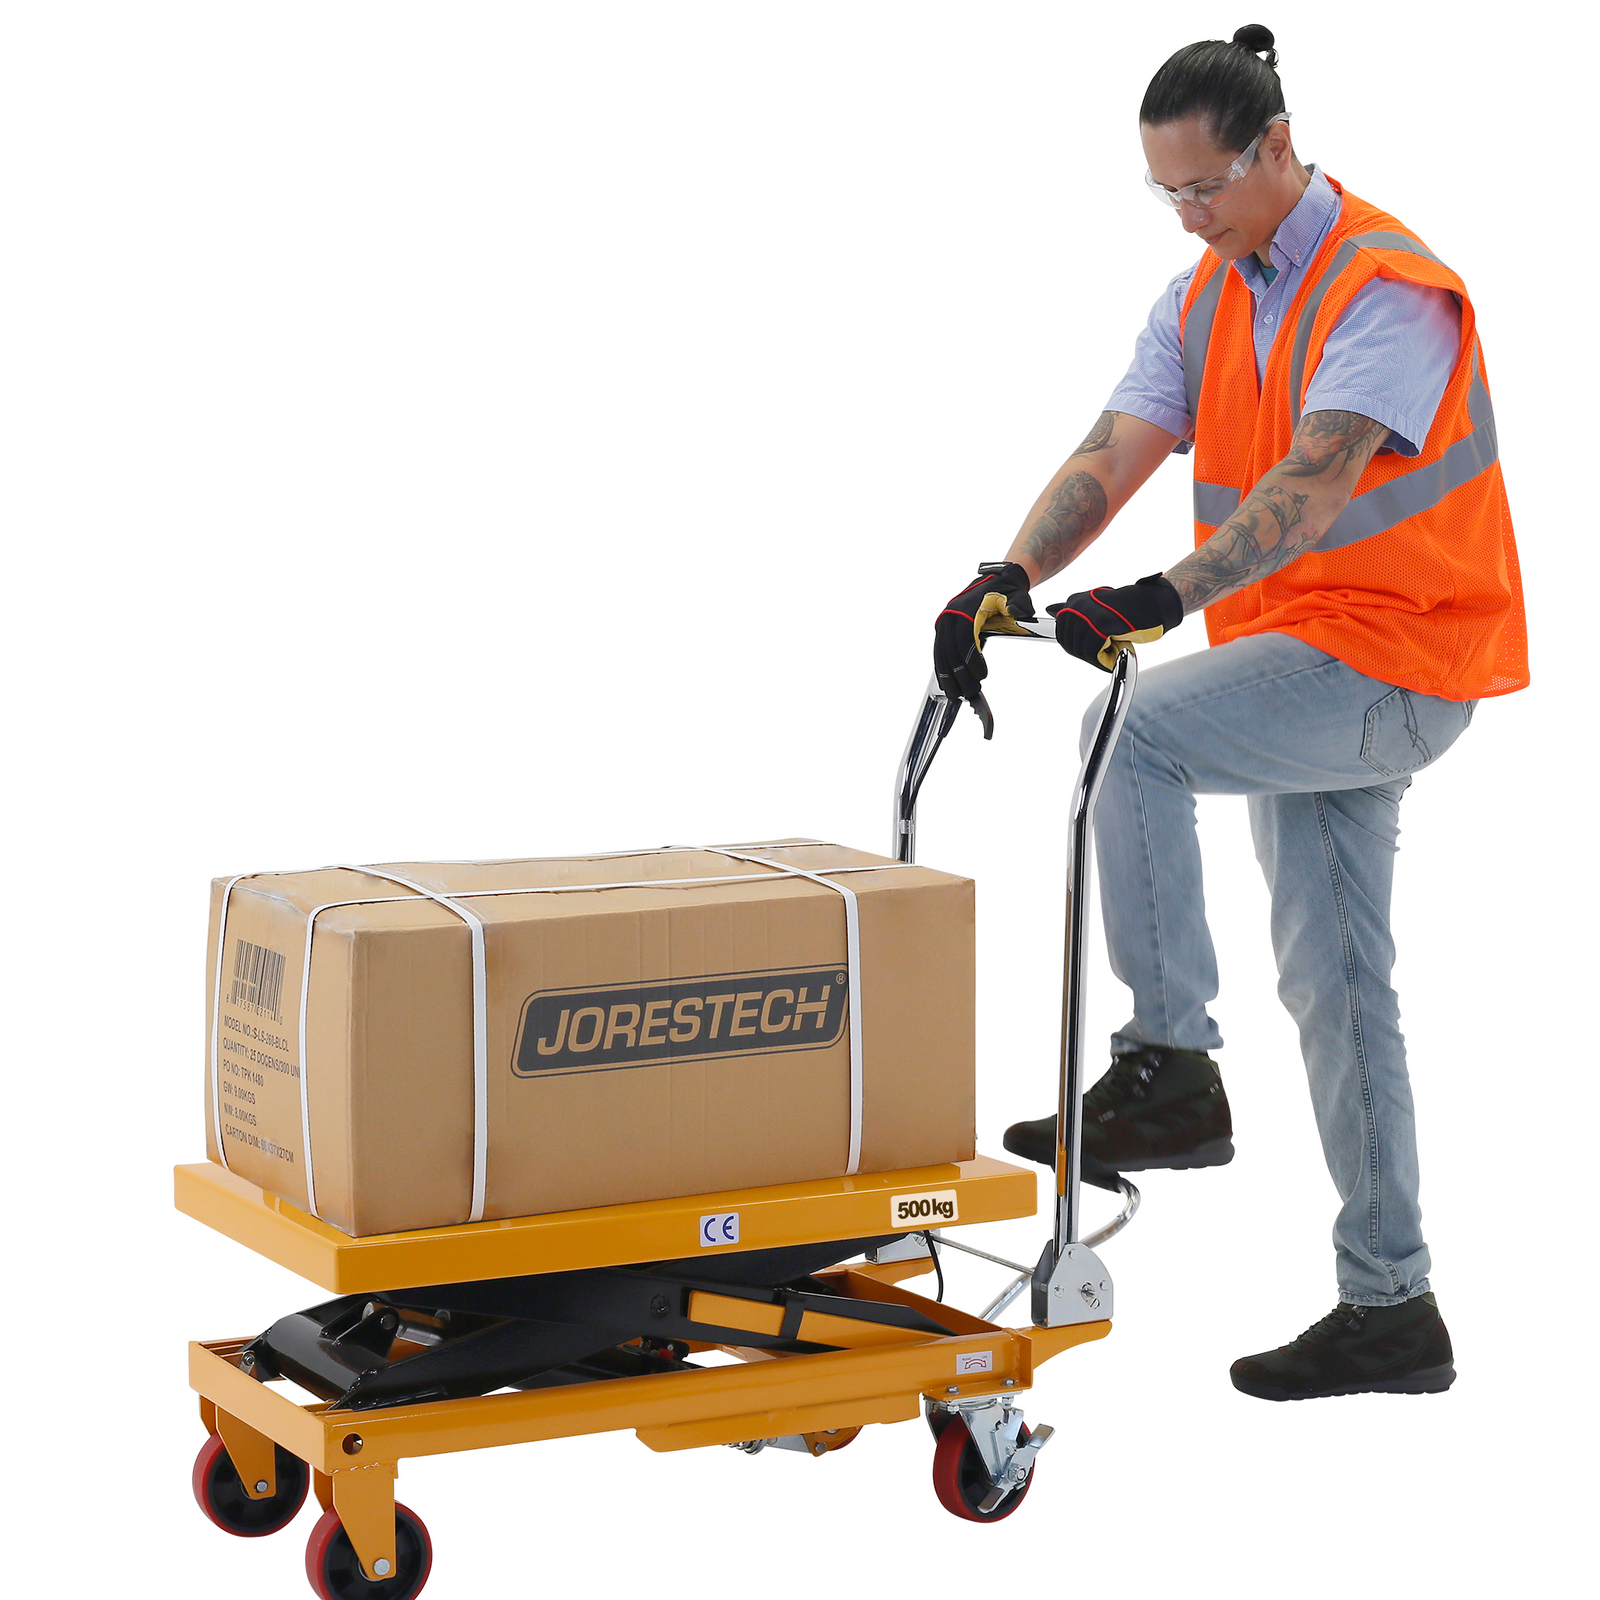 A man wearing an orange high visibility vest is pressing the foot pedal of the Jorestech Scissor lift table to lift a box with ease